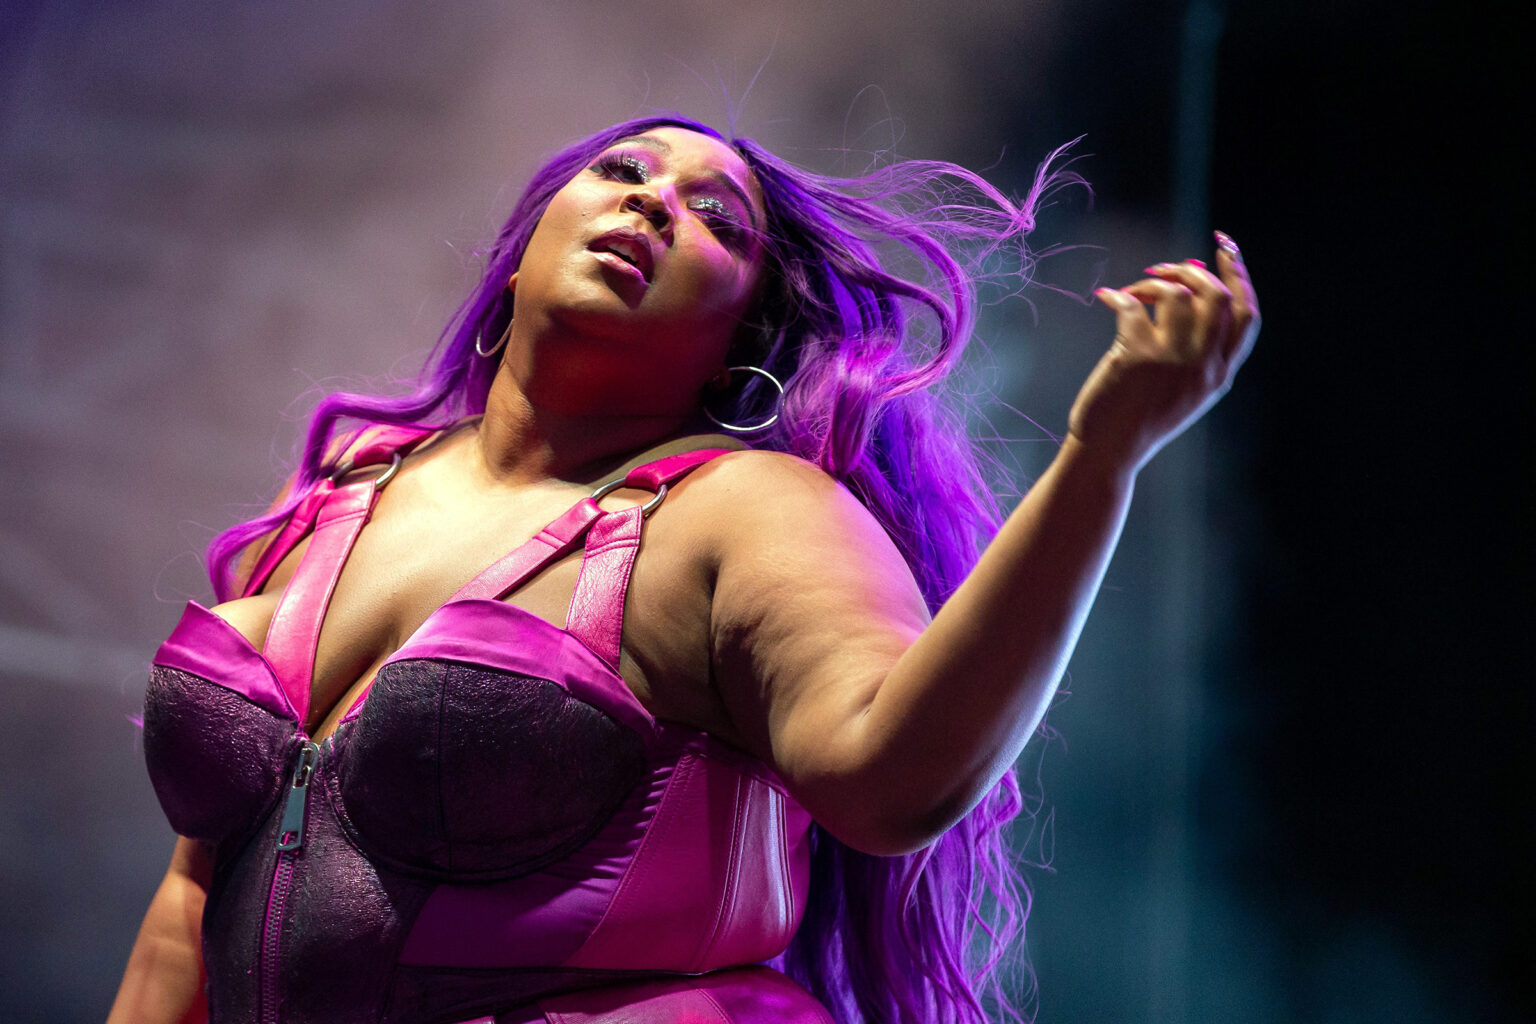 Lizzo stays true to her "Cuz I Love You" lyrics as she defends Demi Lovato's preferred pronounces. Why is this moment caught on camera important?